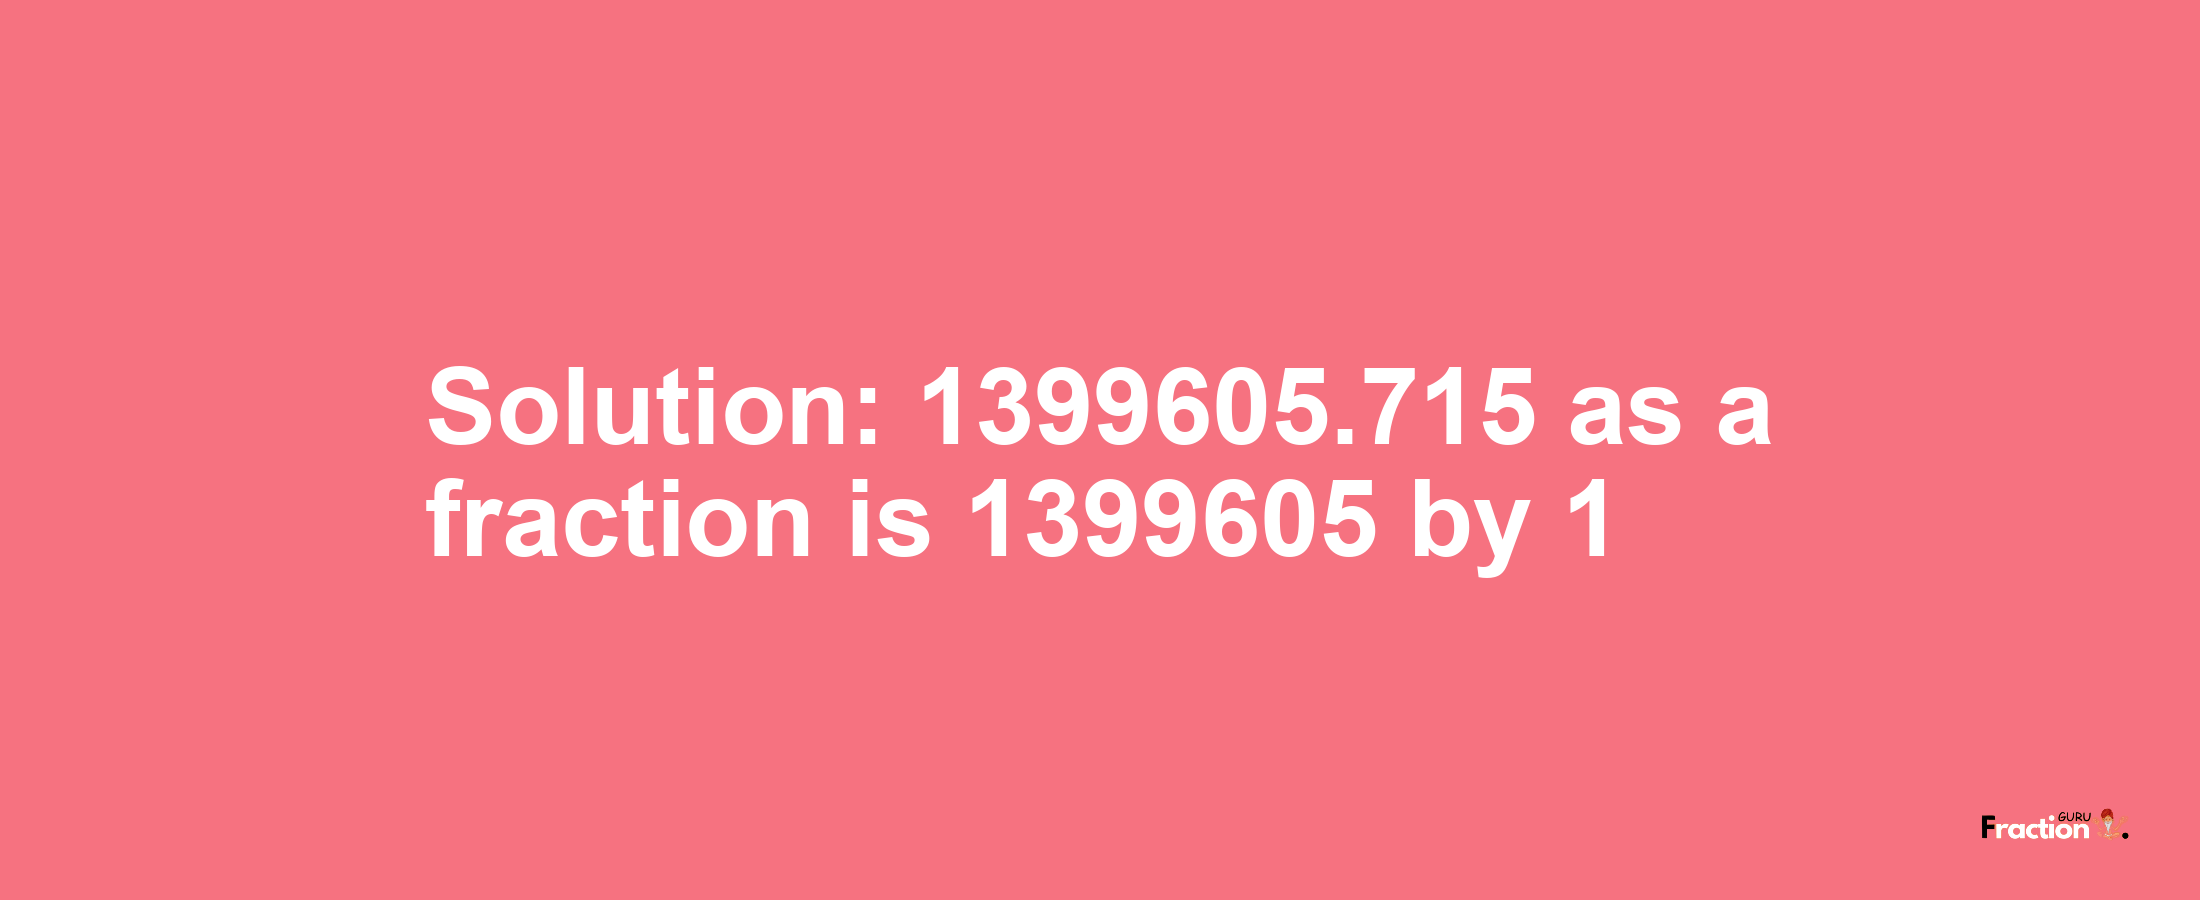 Solution:1399605.715 as a fraction is 1399605/1